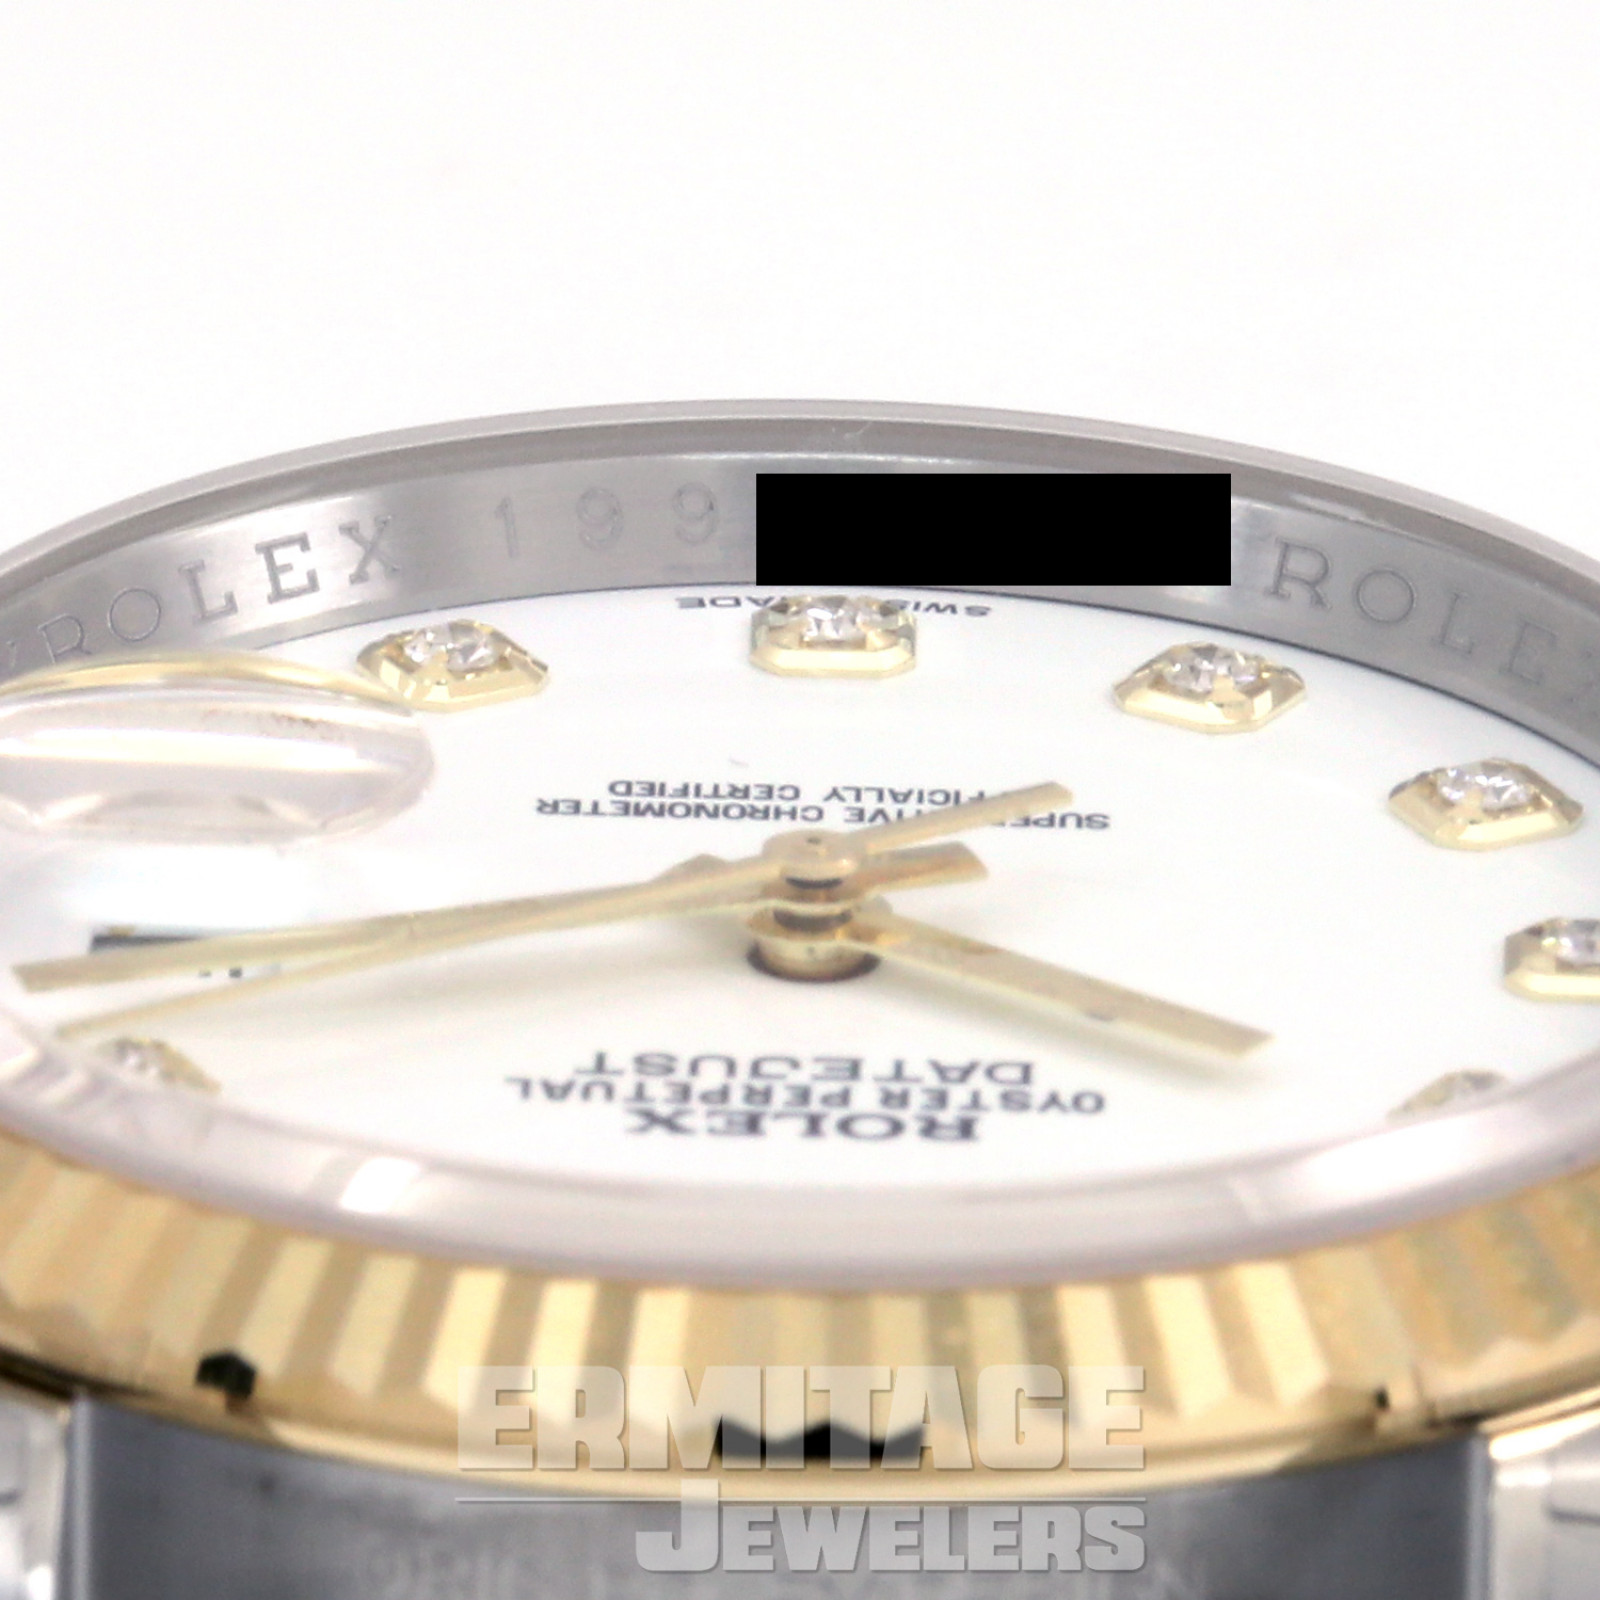 Rolex Datejust 116233 with White Dial